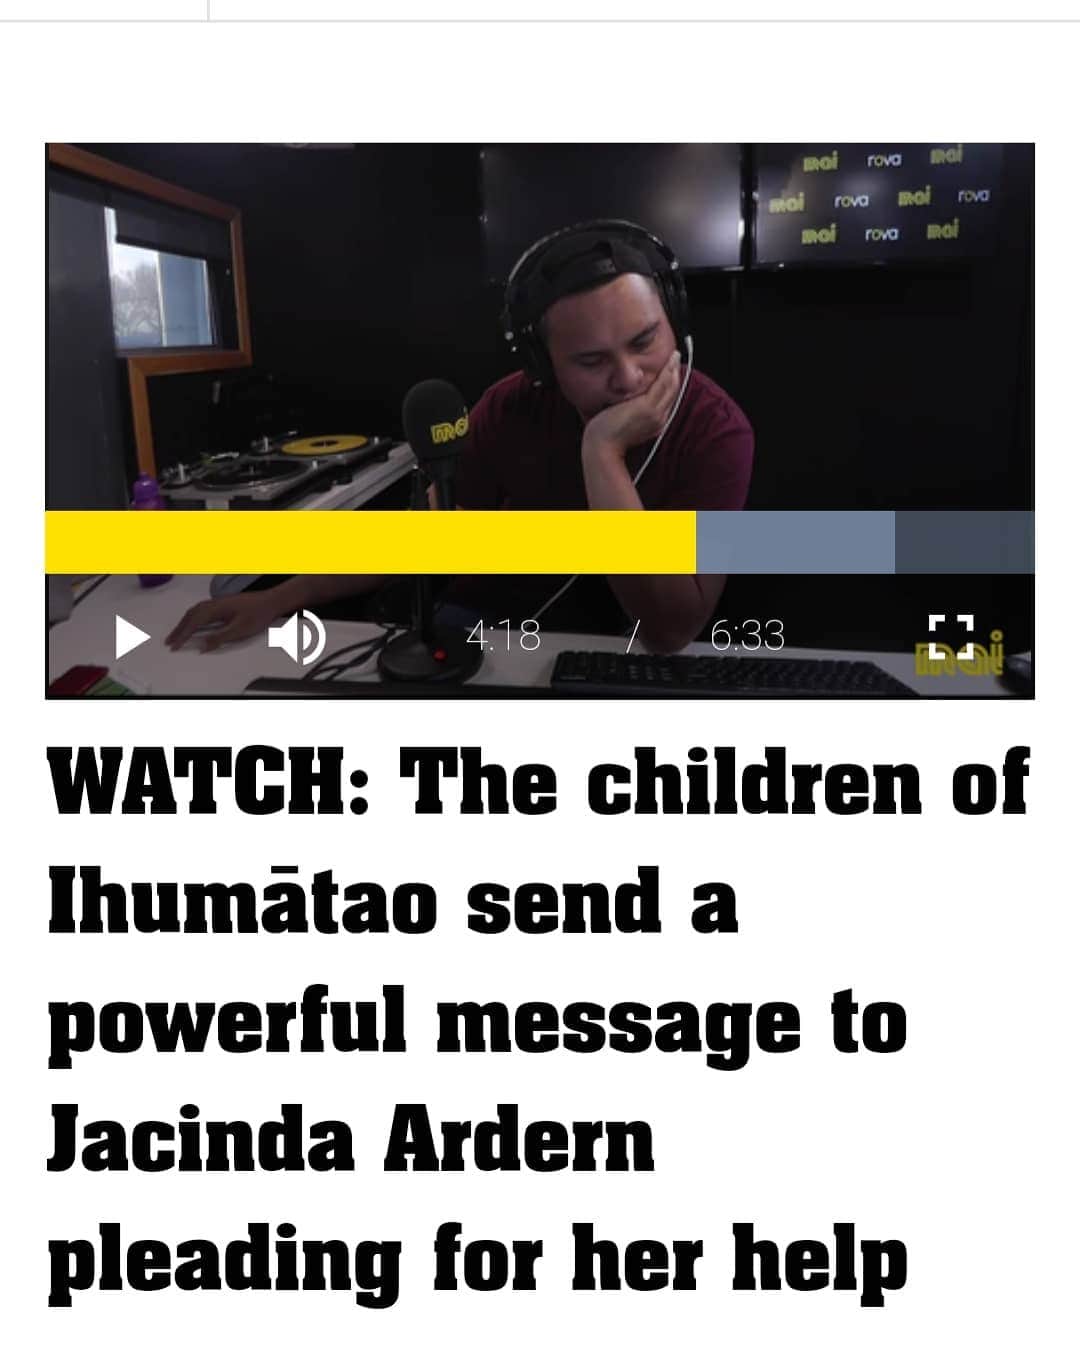 マヌー・ベネットさんのインスタグラム写真 - (マヌー・ベネットInstagram)「During her interview on national MAI FM radio station New Zealand Prime Minister Jacinda Adern diverts debate over the Ihumatoa Protest to state, "We (the Government) are having a big dicussion now on Maori children & care." https://www.maifm.co.nz/home/headlines/2019/07/watch--children-of-ihumtao-send-a-powerful-message-to-jacinda-ar.html  The STATEMENT itself, made by the Prime Minister, attributes blame on Maori parents over the quality of care of their children.  Is it not possible Mrs Prime Minister that brutal Colonization & stealing of land, is not the root cause for most, if not all, slanted statistics & models relating to Maori wealth, health, education, employment, incarceration, suicide, drugs, gangs.  These sad truths lead to one root cause: The Continuation of Oppression of Colonization.  The aim of British Colonization over Aotearoa was to exterminate & or breed out the indigenous population of Maori.  Instead of turning the tables back on Maori HOW ABOUT considering that Maori are trying to achieve RECOGNITION of the TERRORISM Of COLONIZATION through the Ihumatoa process & what you are saying about Maori caring for their children? Maori caring for their children is at the HEART of Ihumatoa!  The Prime Minister is hiding the REAL ISSUE in Identifying with Maori, the ongoing pain & struggle caused by the original theft of this large  parcel of land through the brutal Colonization process.  Jacinda is diverting to prevent the landslide effect of ACKNOWLEDGEMENT.  SAME applied in Australia with the Apology to the Aborigines over the genocide wreaked upon their peoples through British Colonization. They sought an "Apology" to help healing for the millions of Aborigines killed & still suffering.  Ihumatoa could be THE Issue raised to undermine & expose once & for all, the brutal history of Colonialism.  Success relies upon the persistence of Maori & indigenous people's worldwide. Let's support eachother, each grab a paddle, for the many rowers in this waka (canoe) will make it an undeniable force, an "idea" whose time has come!」7月29日 15時43分 - manubennett